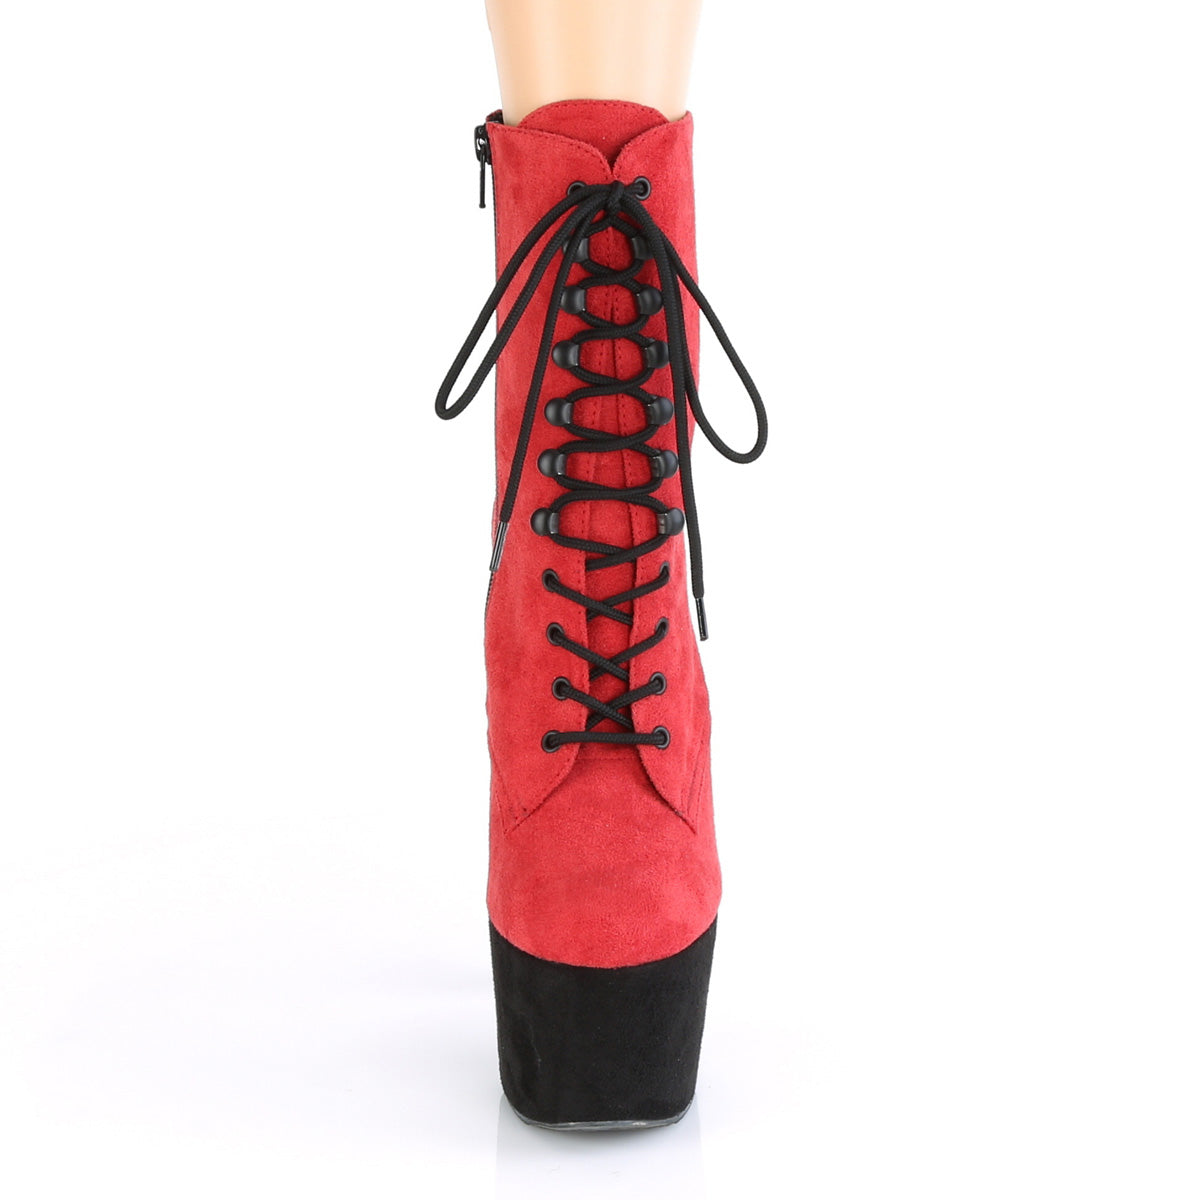 ADORE-1020FSTT Pleaser 7" Heel Red Exotic Dancing Ankle Boot-Pleaser- Sexy Shoes Alternative Footwear